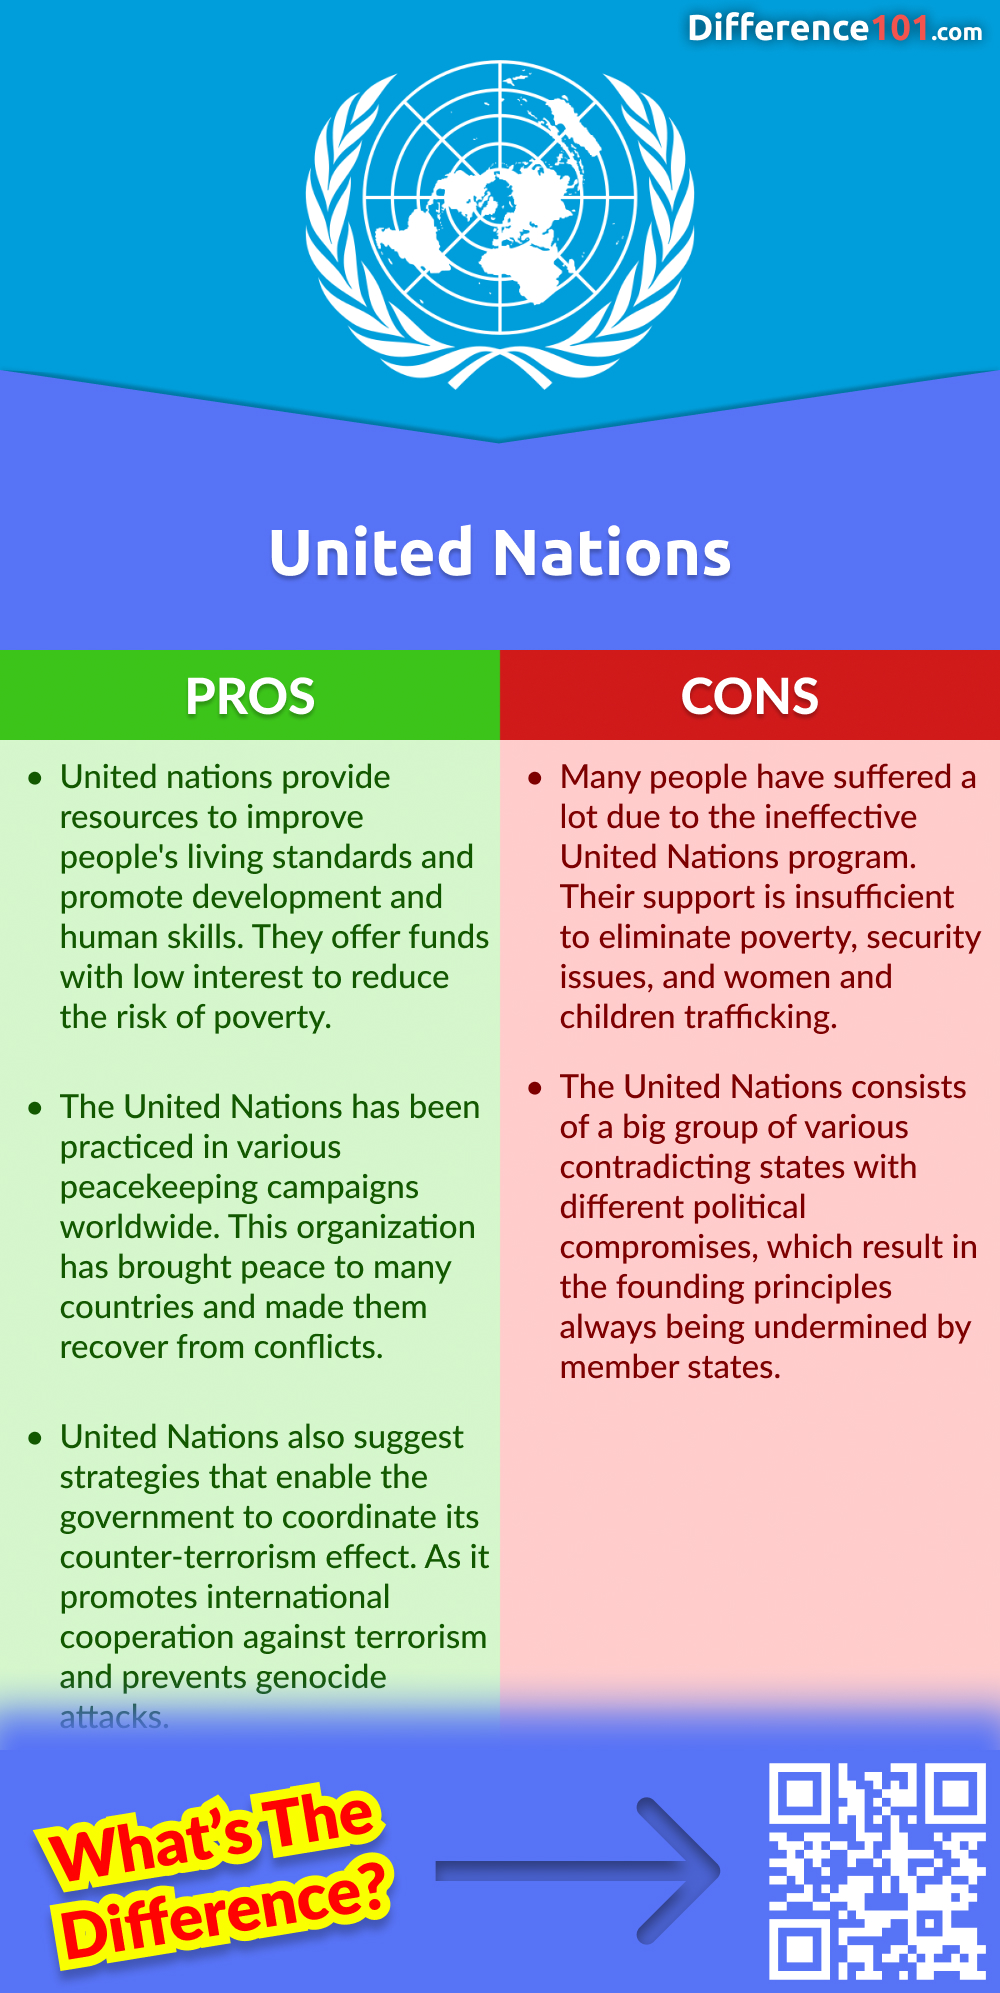 United Nations Pros and Cons